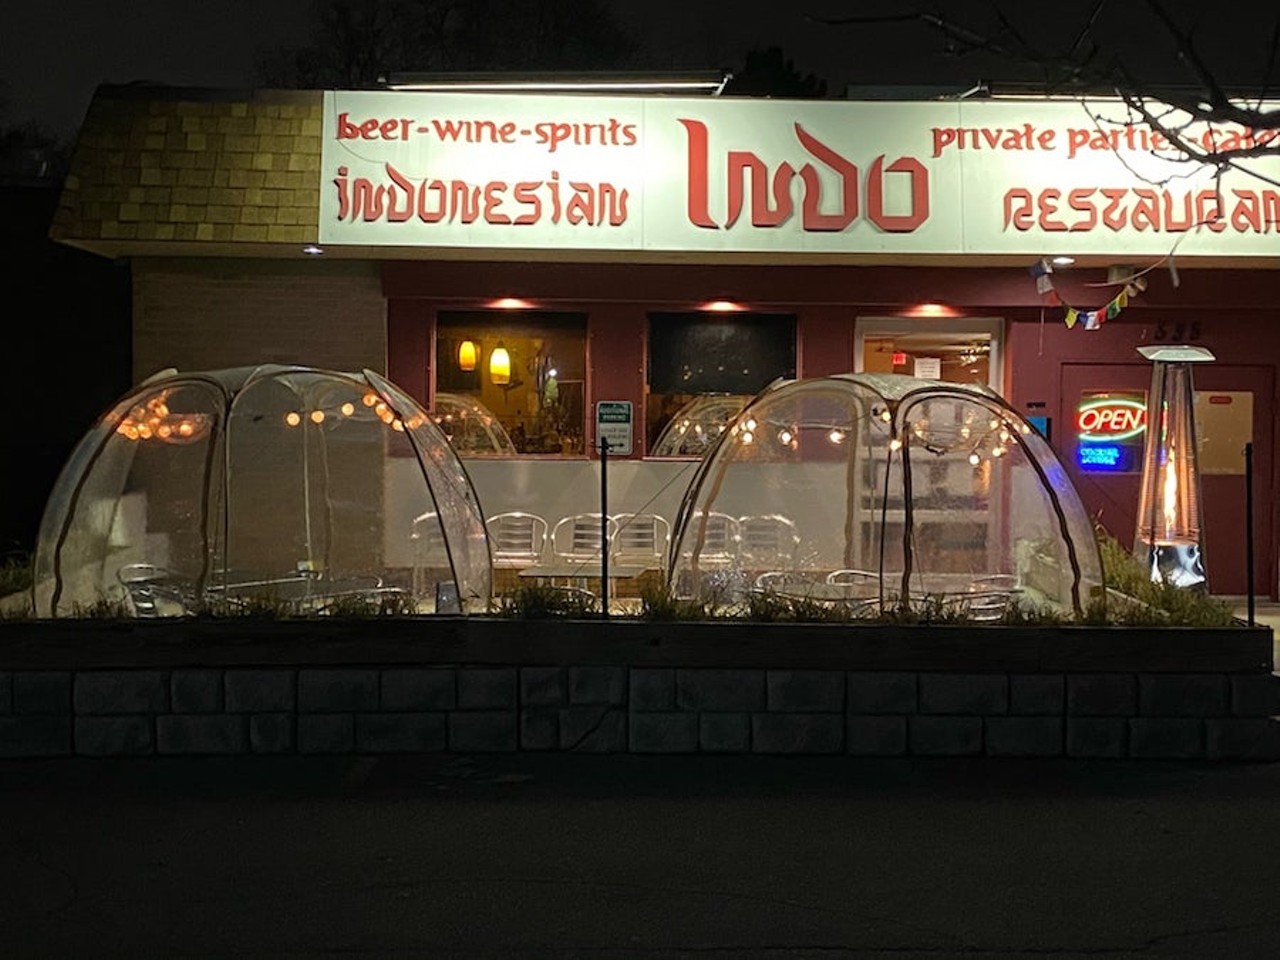 INDO Indonesian Restaurant
1535 Cass Lake Rd., Keego Harbor; 248-622-4408; indo.res
The outdoor dining hustle is real at Keego Harbor&#146;s Indonesian eatery INDO, where they creatively pivoted to the tent/igloo life by erecting a couple of private outdoor pods. But don&#146;t go to INDO just for their modest pods. Go for the menu, which is made up of &#147;delicate and fiery&#148;  traditional family recipes from Central Java. 
Photo via INDO Indonesian Restaurant/Facebook